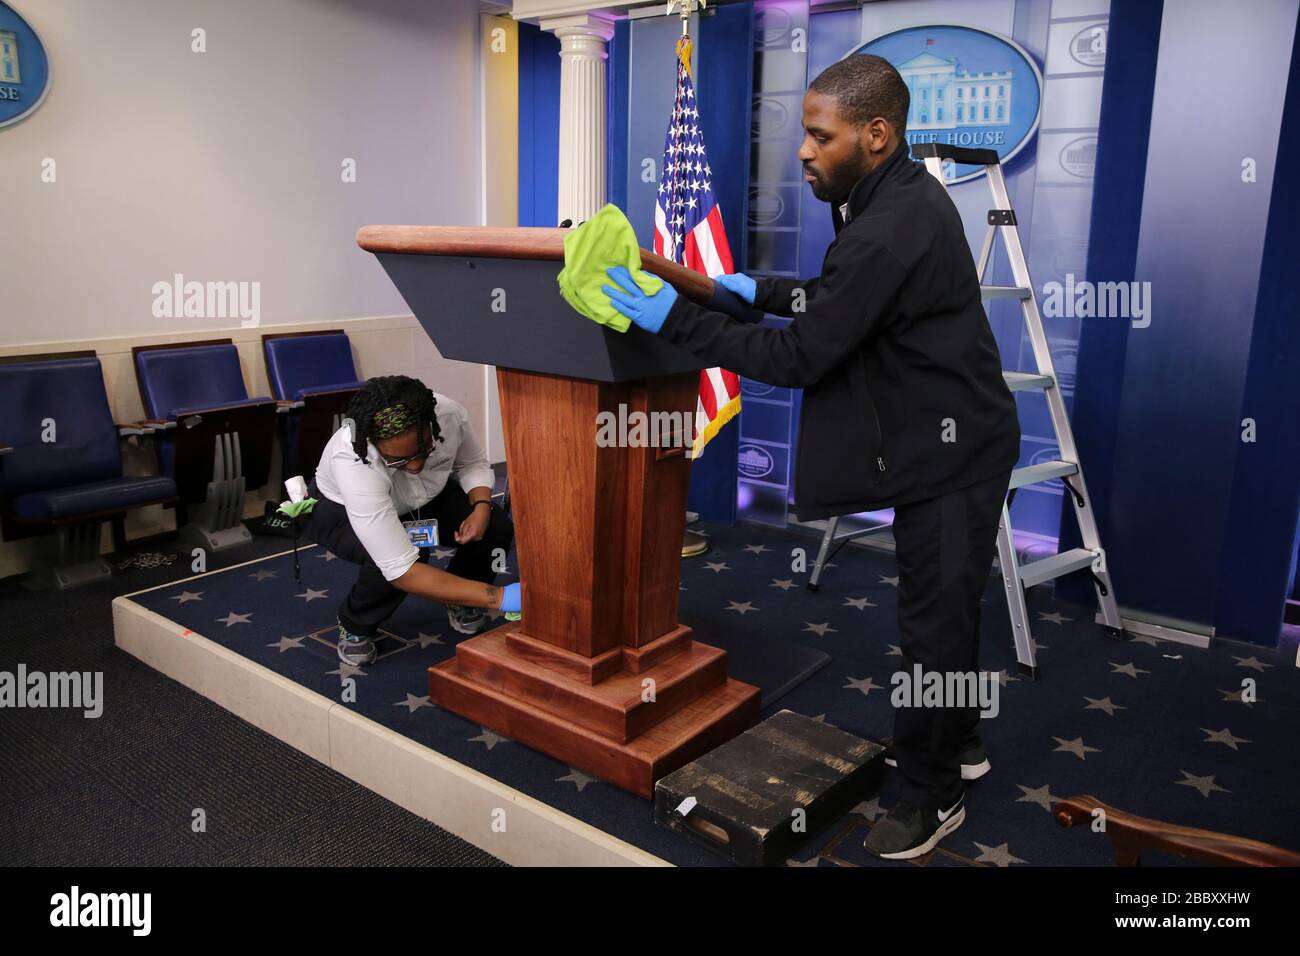 Washington DC, USA. 01st Apr, 2020. Workers clean the podium in the White House briefing room ahead the coronavirus task force briefing with President Donald Trump, on April 1, 2020, in Washington. Credit: MediaPunch Inc/Alamy Live News Stock Photo